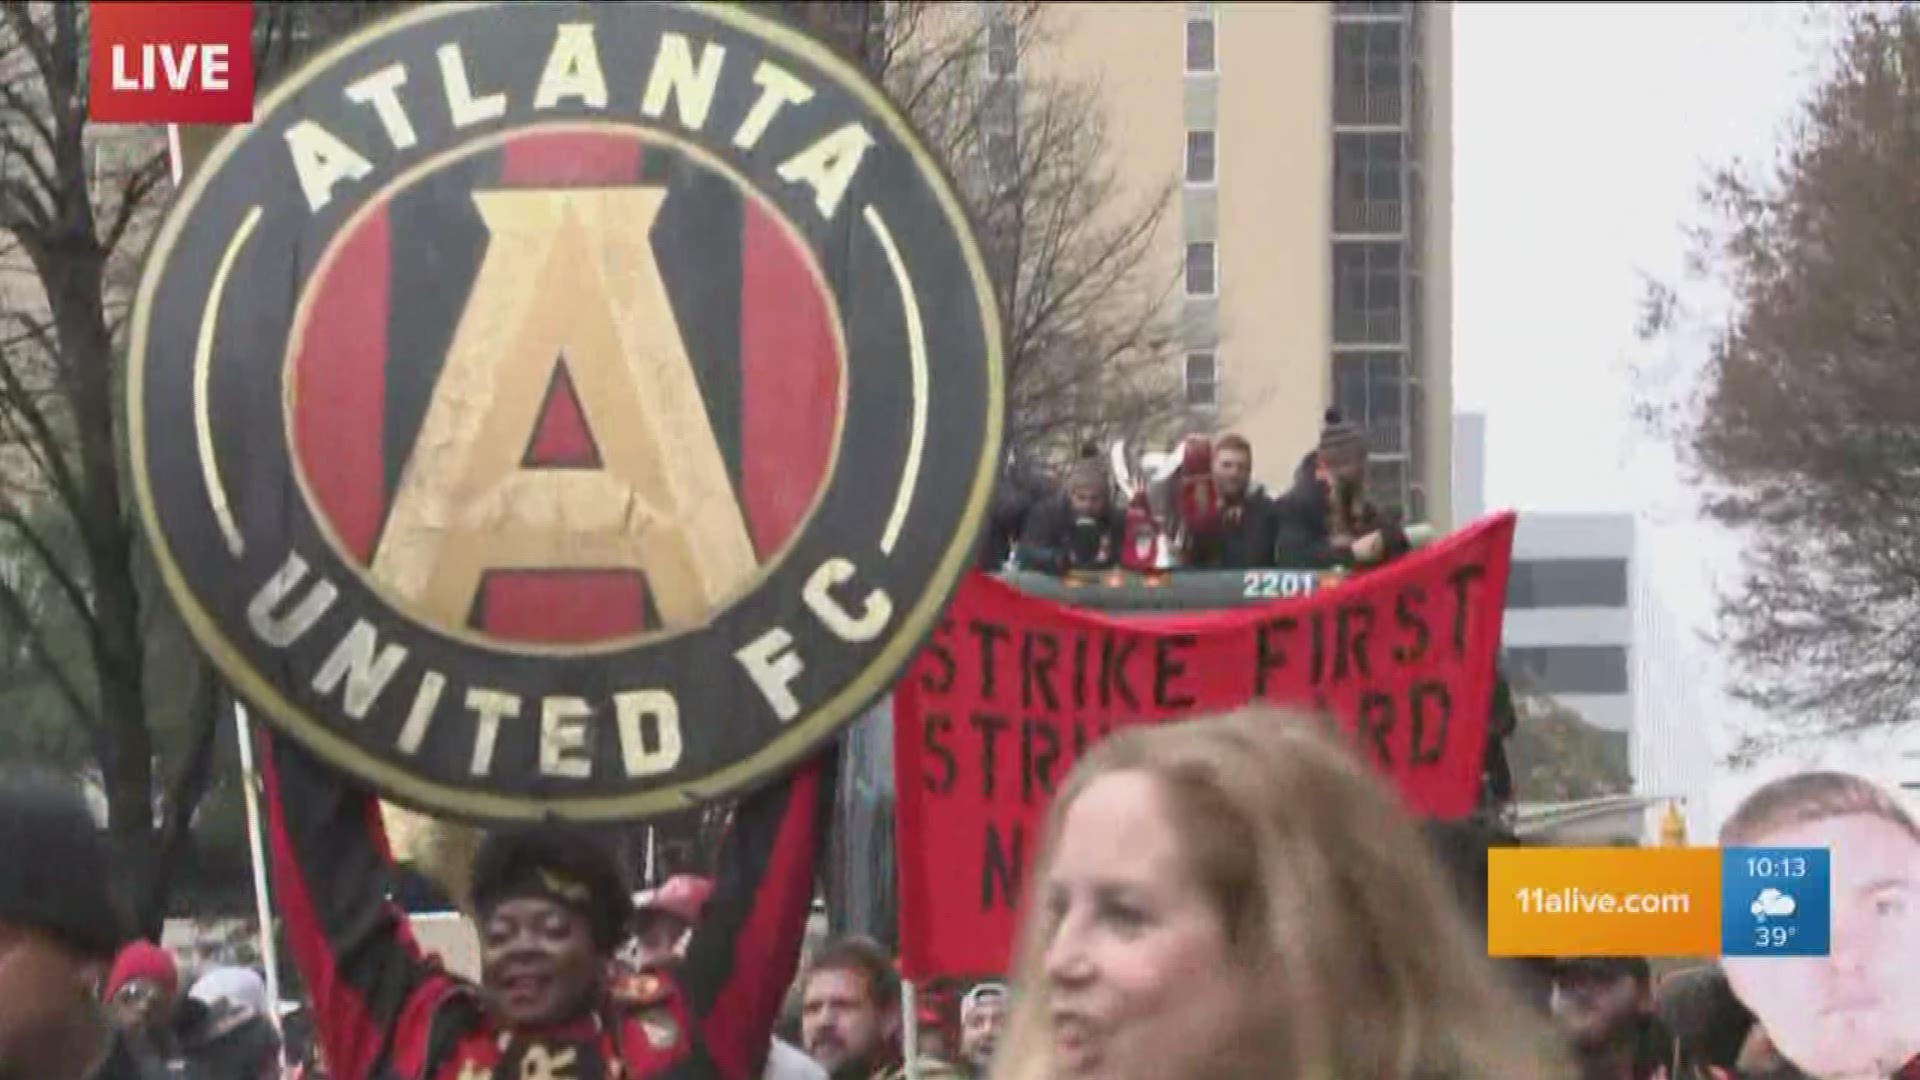 Atlanta United won the MLS Cup, bringing the first championship to Atlanta in two decades. Now, we celebrate.